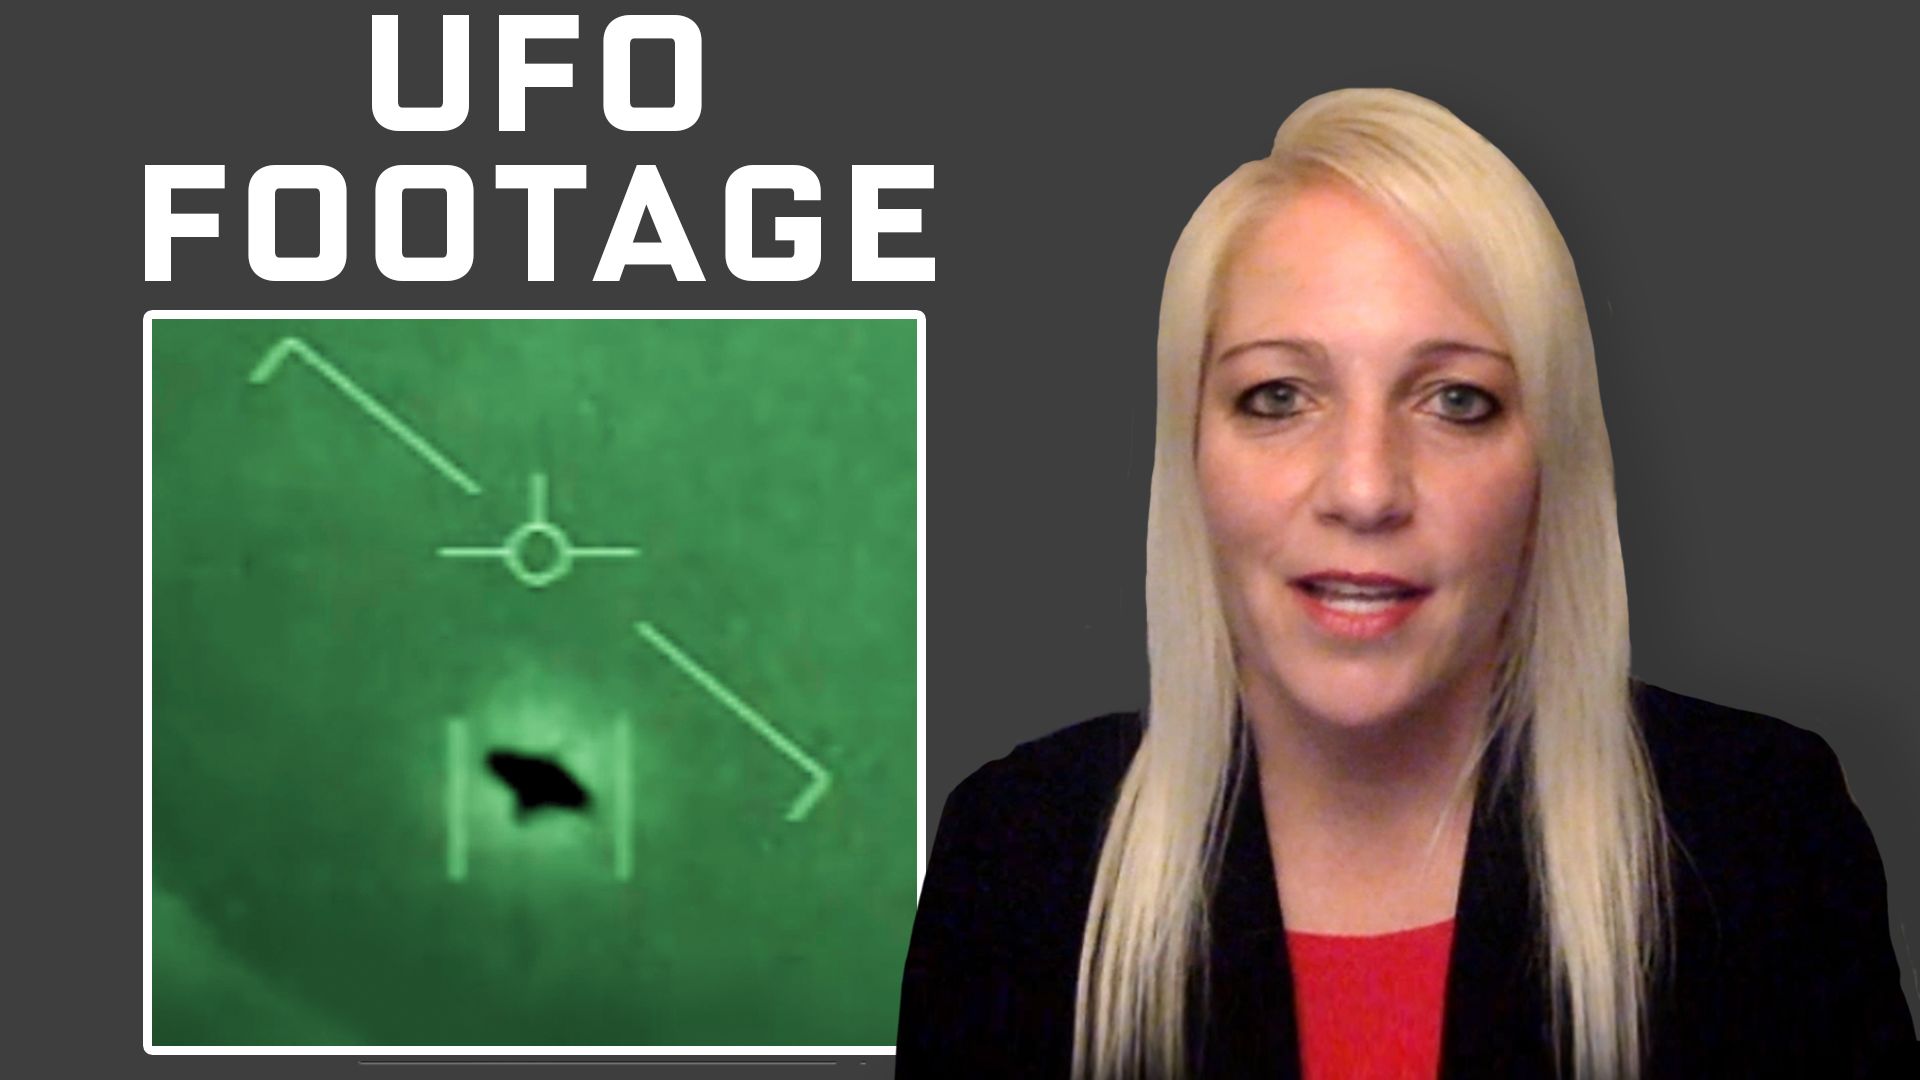 Watch Former Air Force Pilot Breaks Down UFO Footage | Currents | WIRED